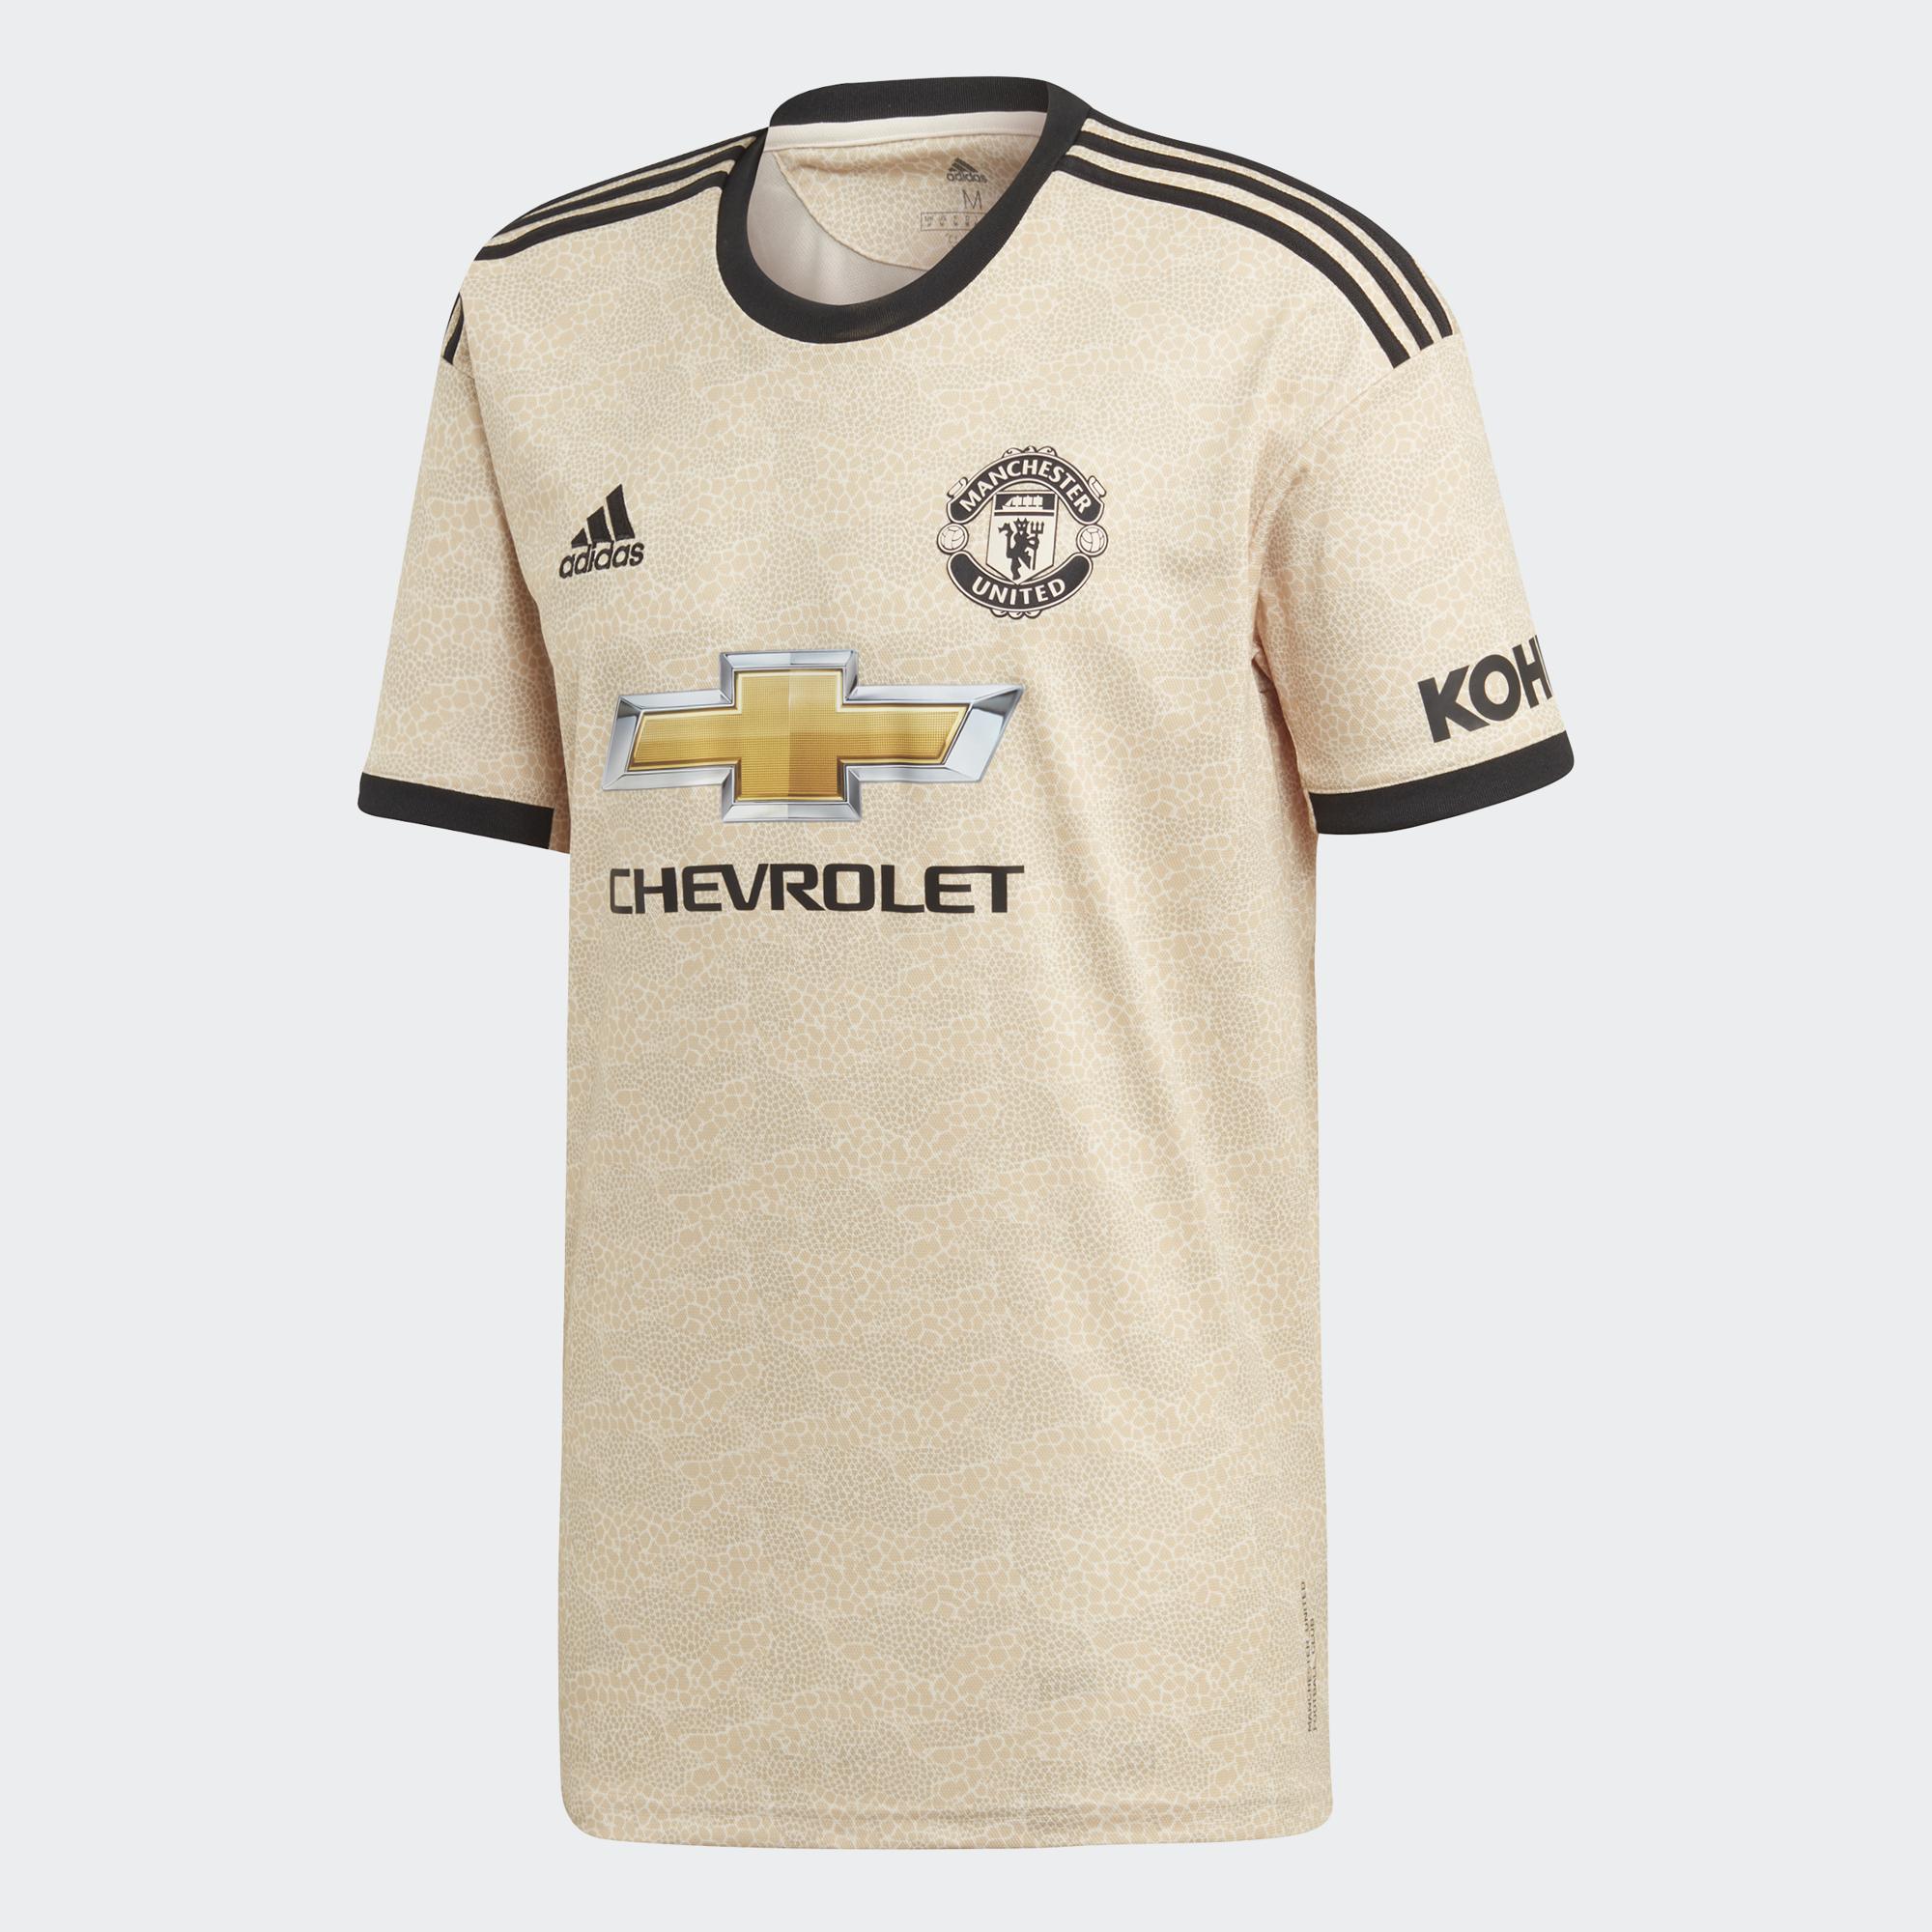 Adidas Jersey Away Manchester United   19/20